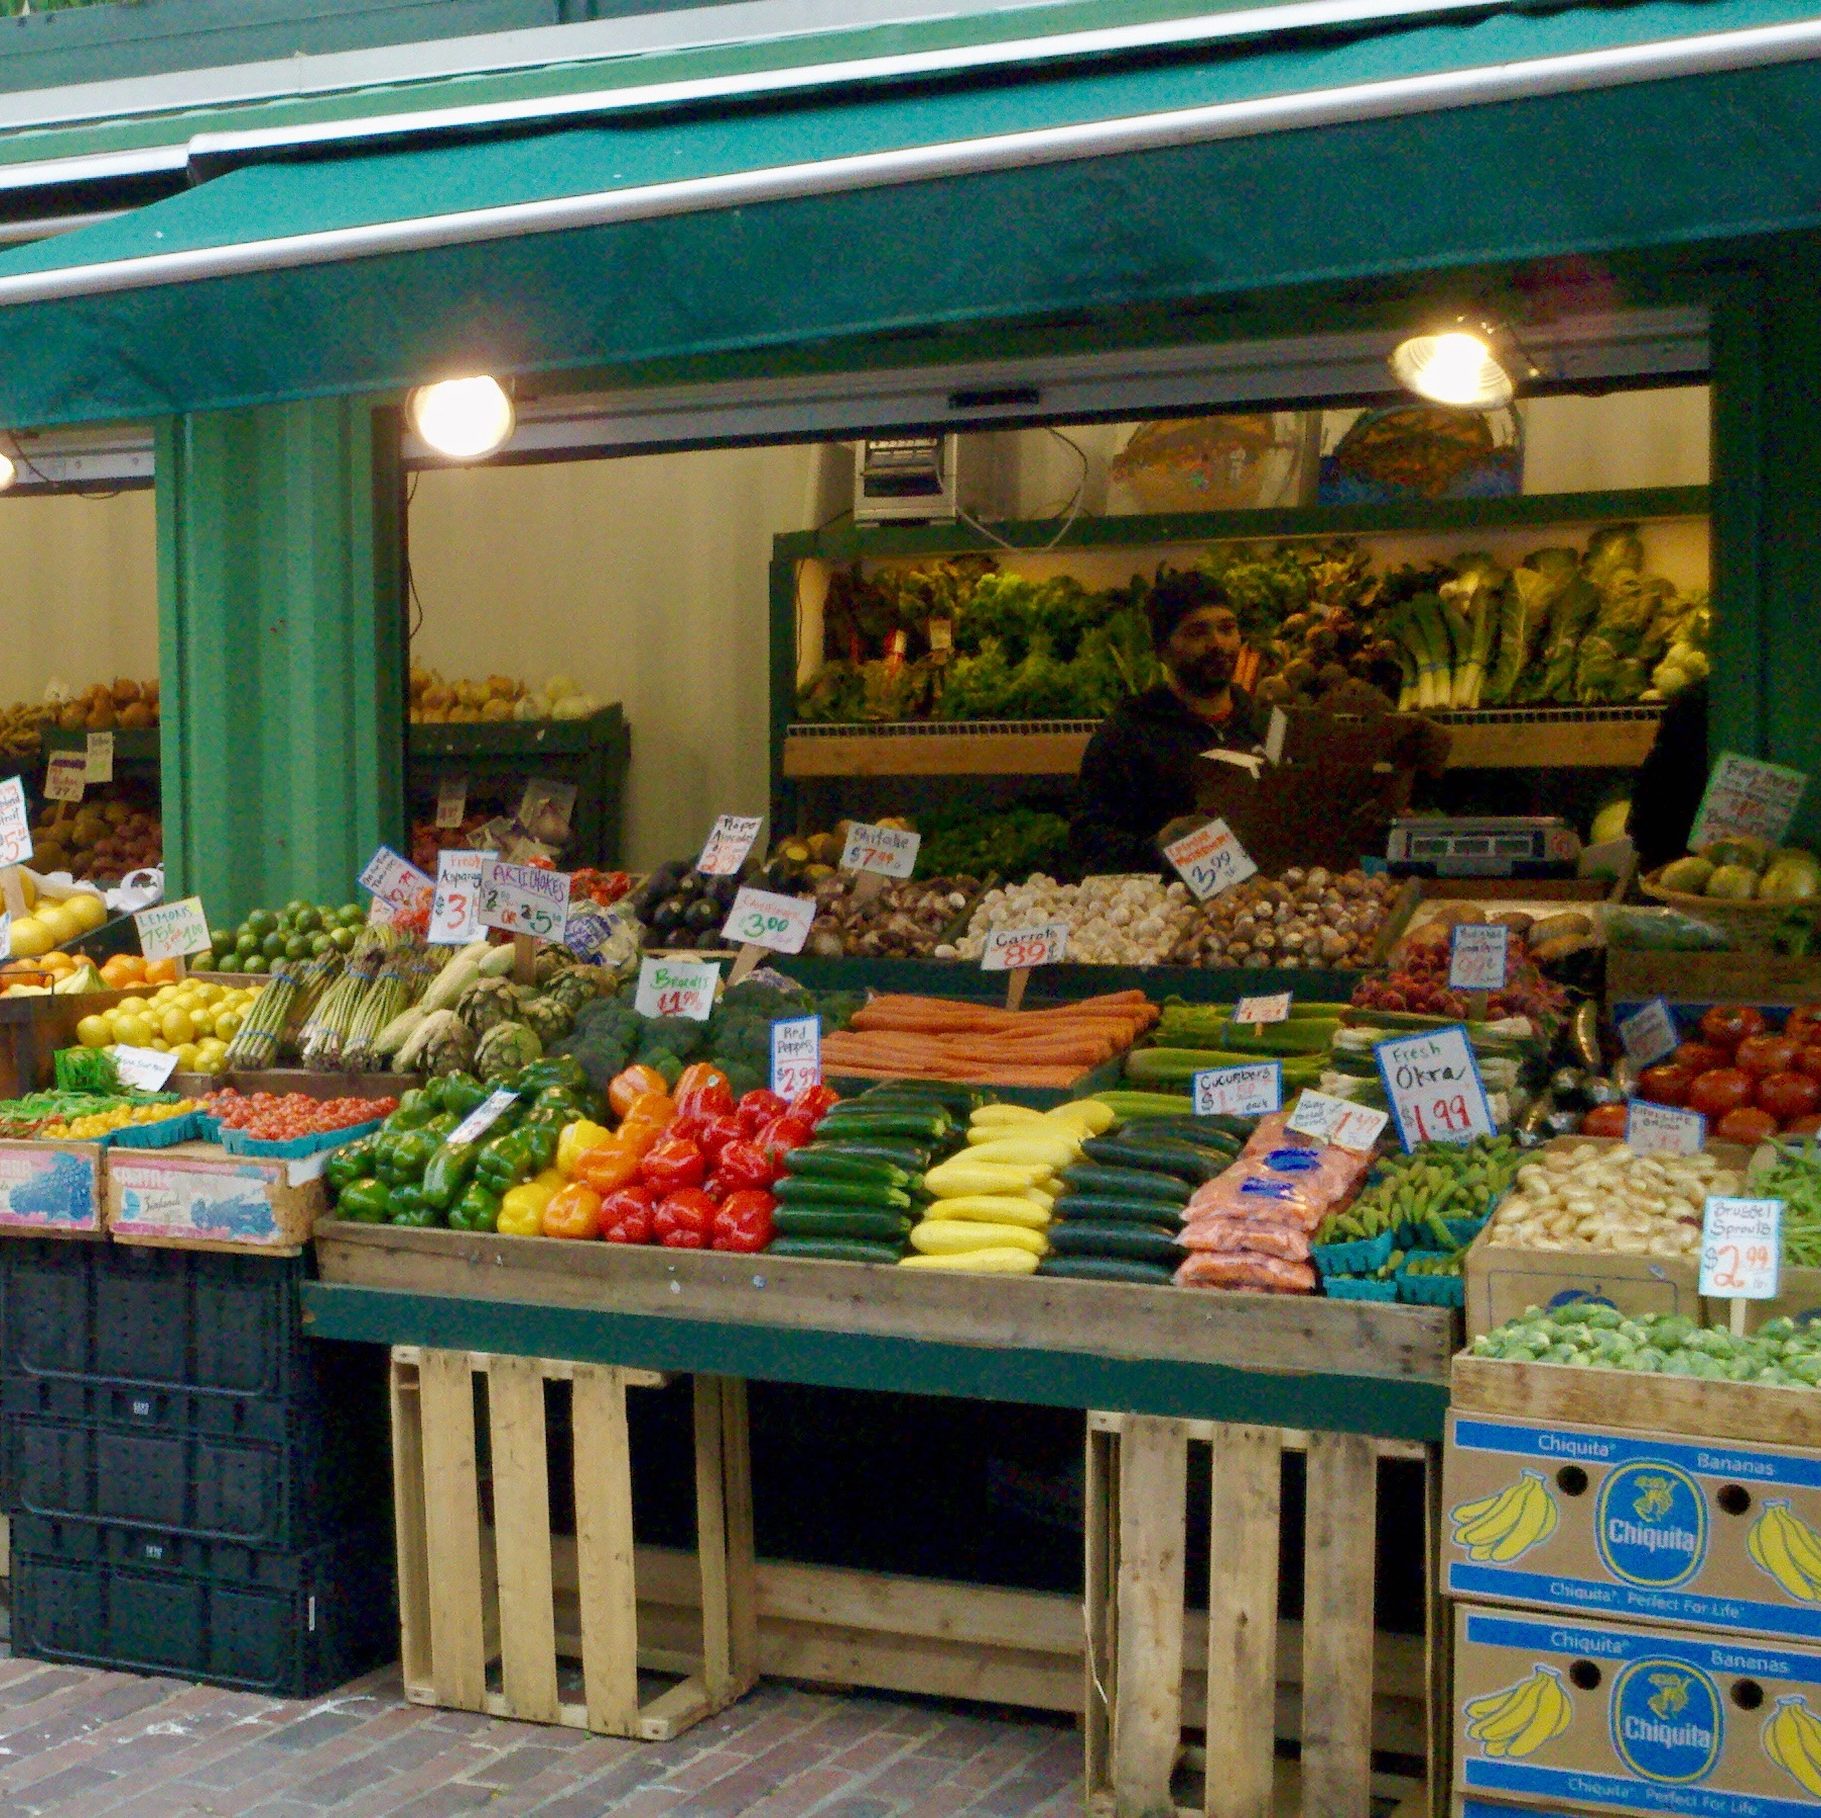 Produce stand found at Pike Place Market in Seattle, Washington